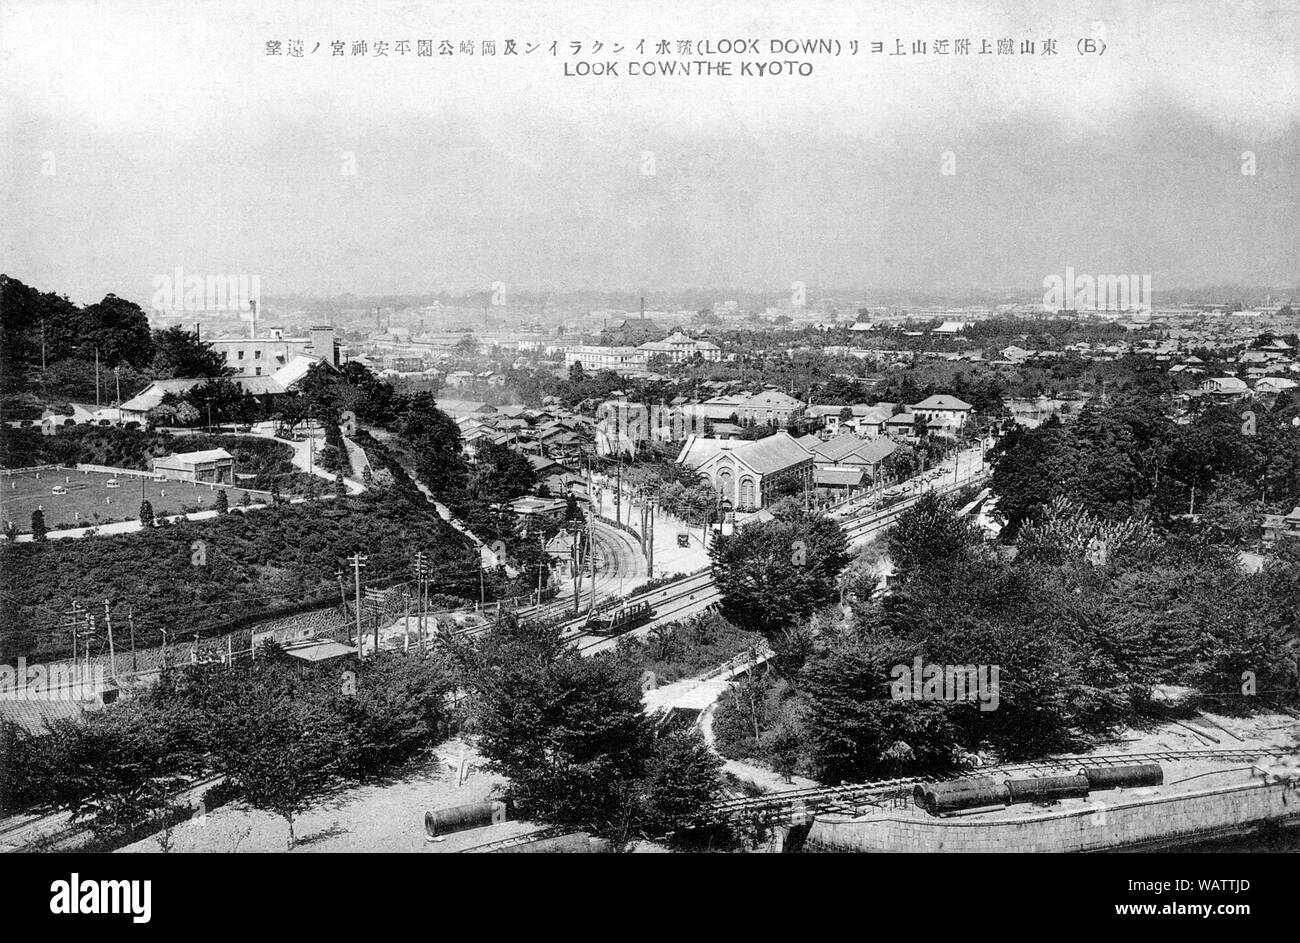 [ 1920s Japan - Kyoto Incline ] —   The Inclined Lift boat railway, Okazaki Park and Japan's first hydroelectric power plant, Keage Power Plant (the L-shaped building in the middle) around Higashiyama in Kyoto.   Between 1885 and 1912, canals were built to bring water from Lake Biwa, across the mountains, to Kyoto. The Incline was used to transfer boats used in the canal.   20th century vintage postcard. Stock Photo